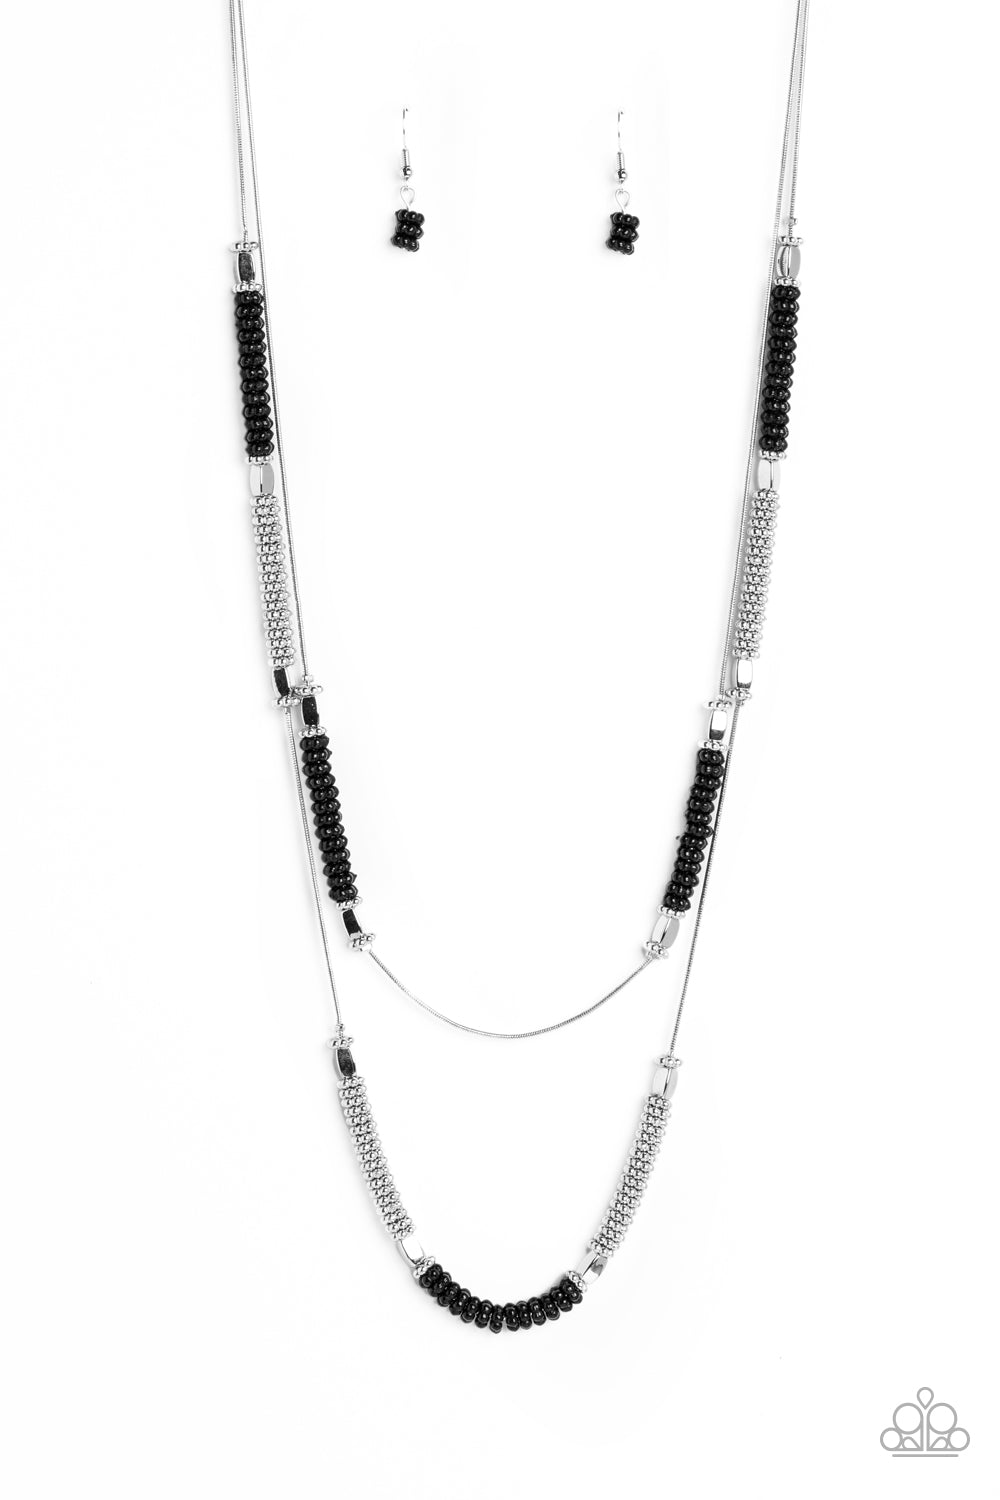 Caviar Chic Black &amp; Silver Necklace - Paparazzi Accessories- lightbox - CarasShop.com - $5 Jewelry by Cara Jewels